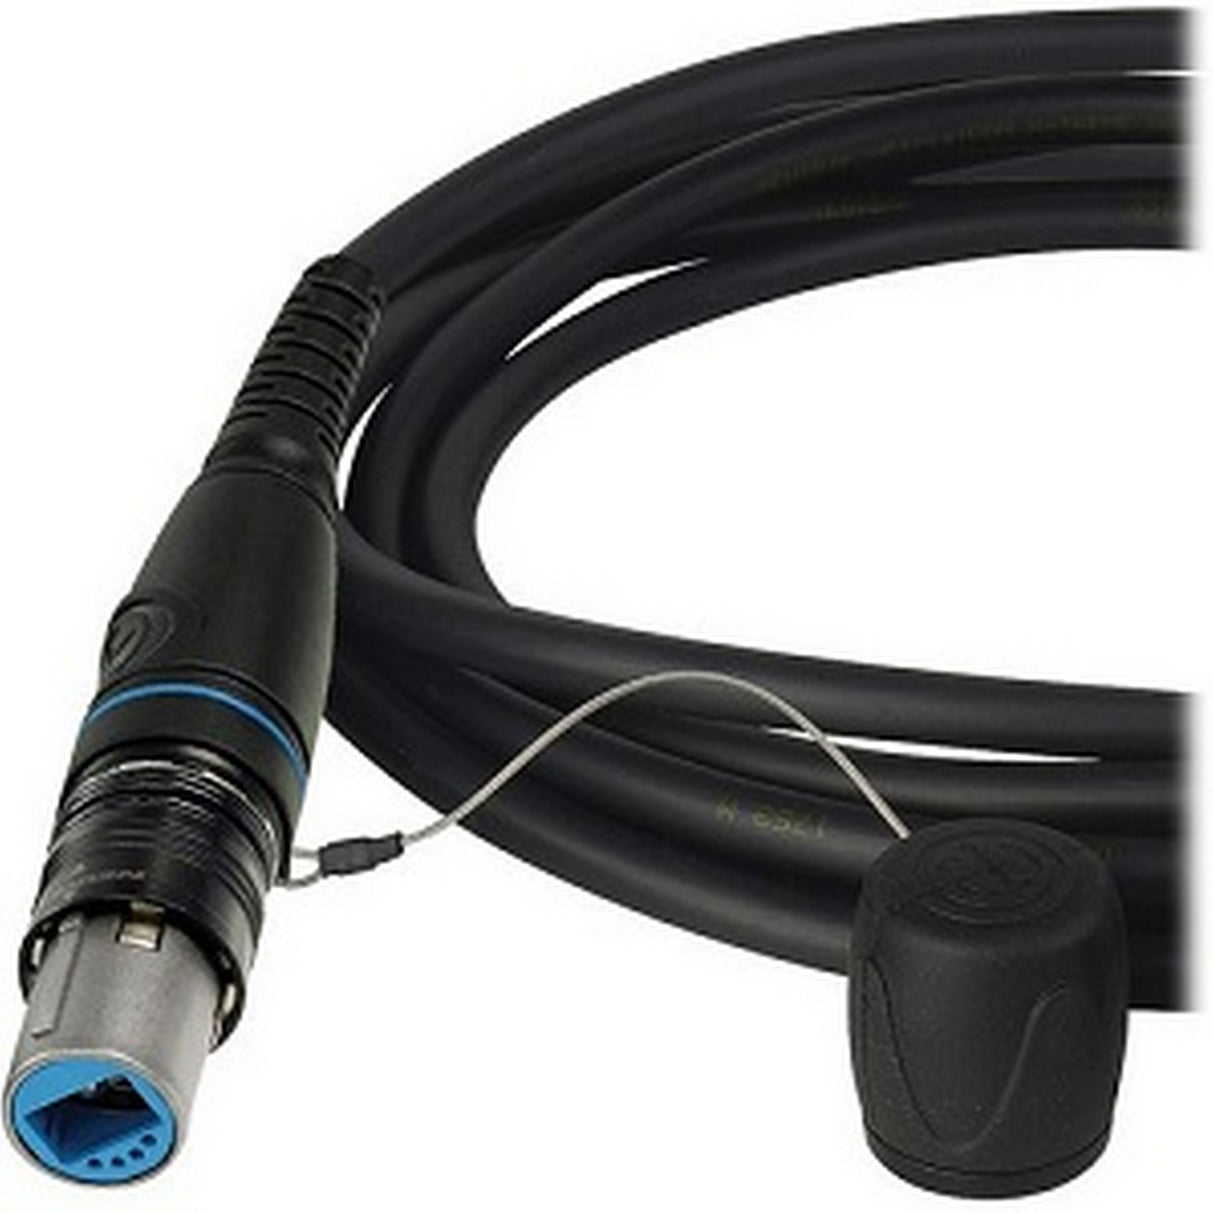 JVC VCFSH075NMC SMPTE Hybrid Fiber Cable with opticalCON Connectors, 75-Meters